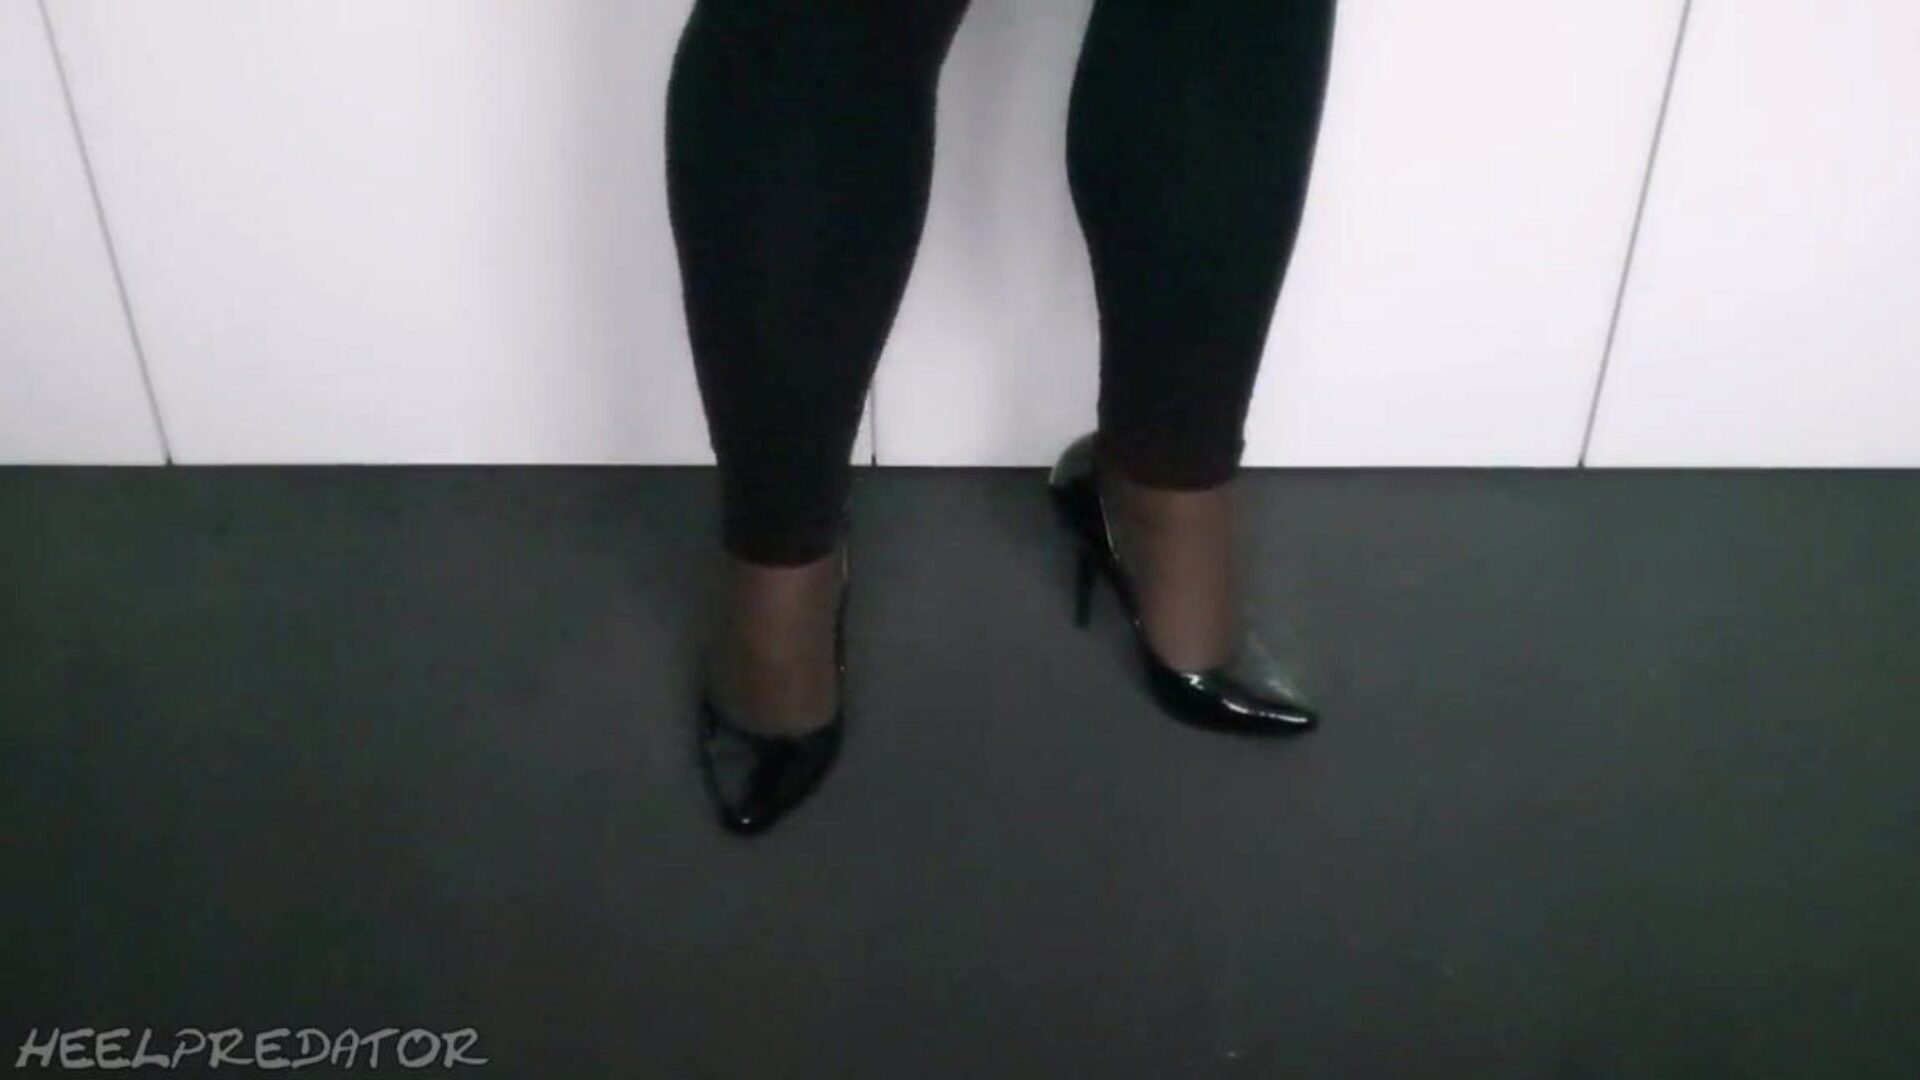 Showing My New Black Patent Heels, Free Porn 43: xHamster Watch Showing My New Black Patent Heels clip on xHamster, the fattest HD hook-up tube web page with tons of free Free Black Pornhub & Black Twitter porn vids